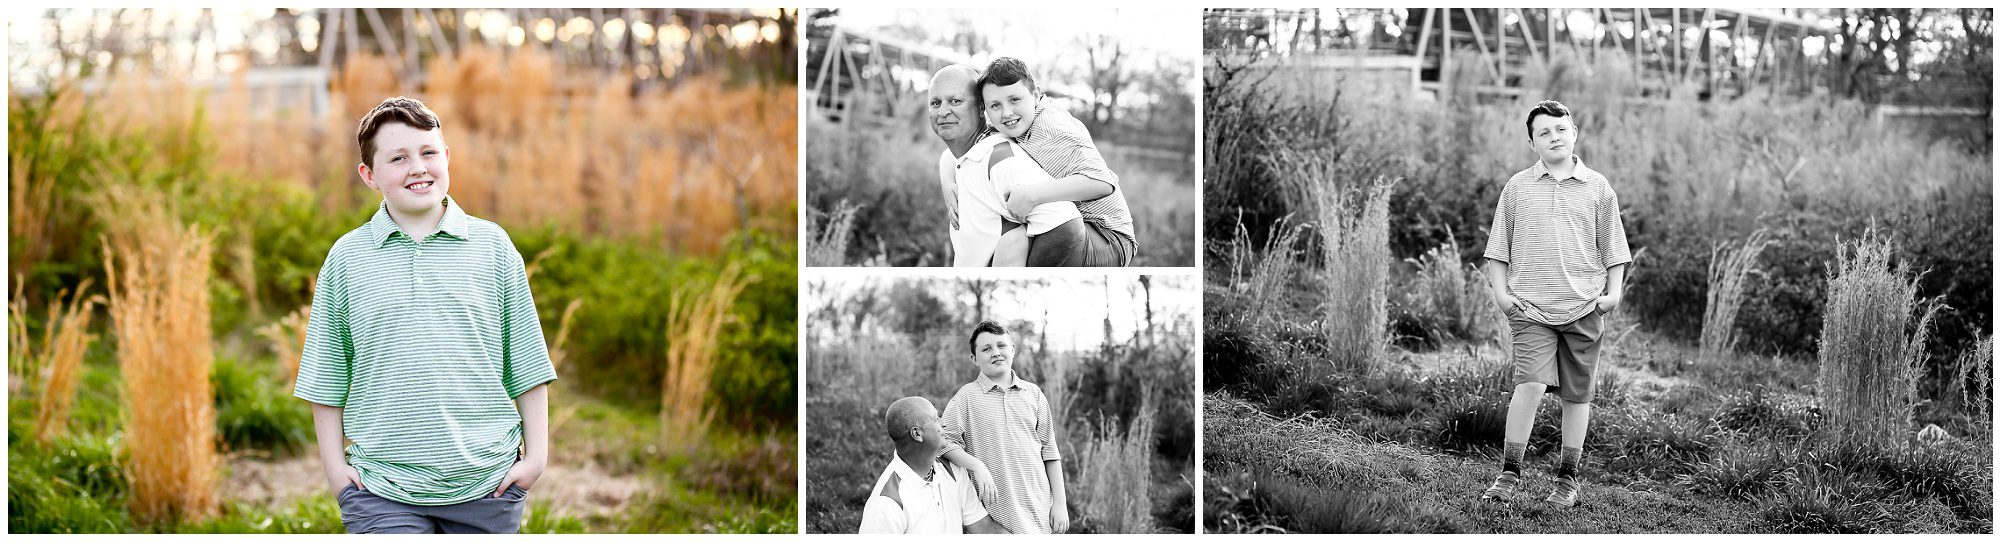 Fluvanna Father and Son Spring Portraits in Charlottesville 13 birthday dad teen cville photographer fluco lake monticello virginia albemarle pictures pics